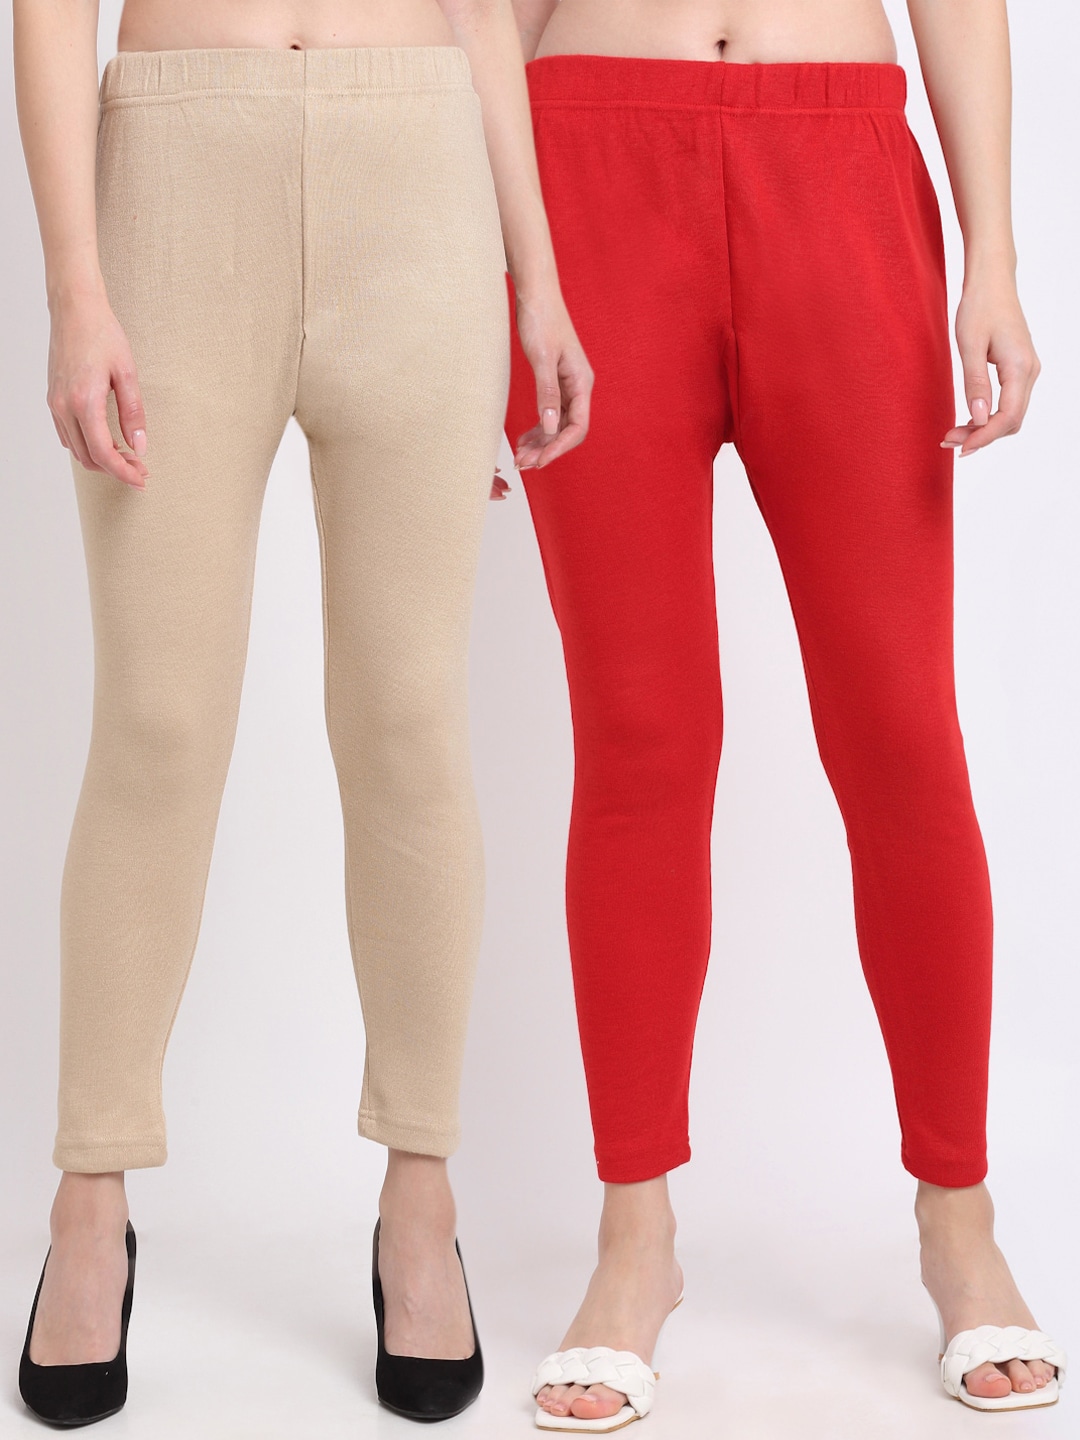 TAG 7 Women Pack Of 2 Red & Beige Solid Ankle-Length Leggings Price in India